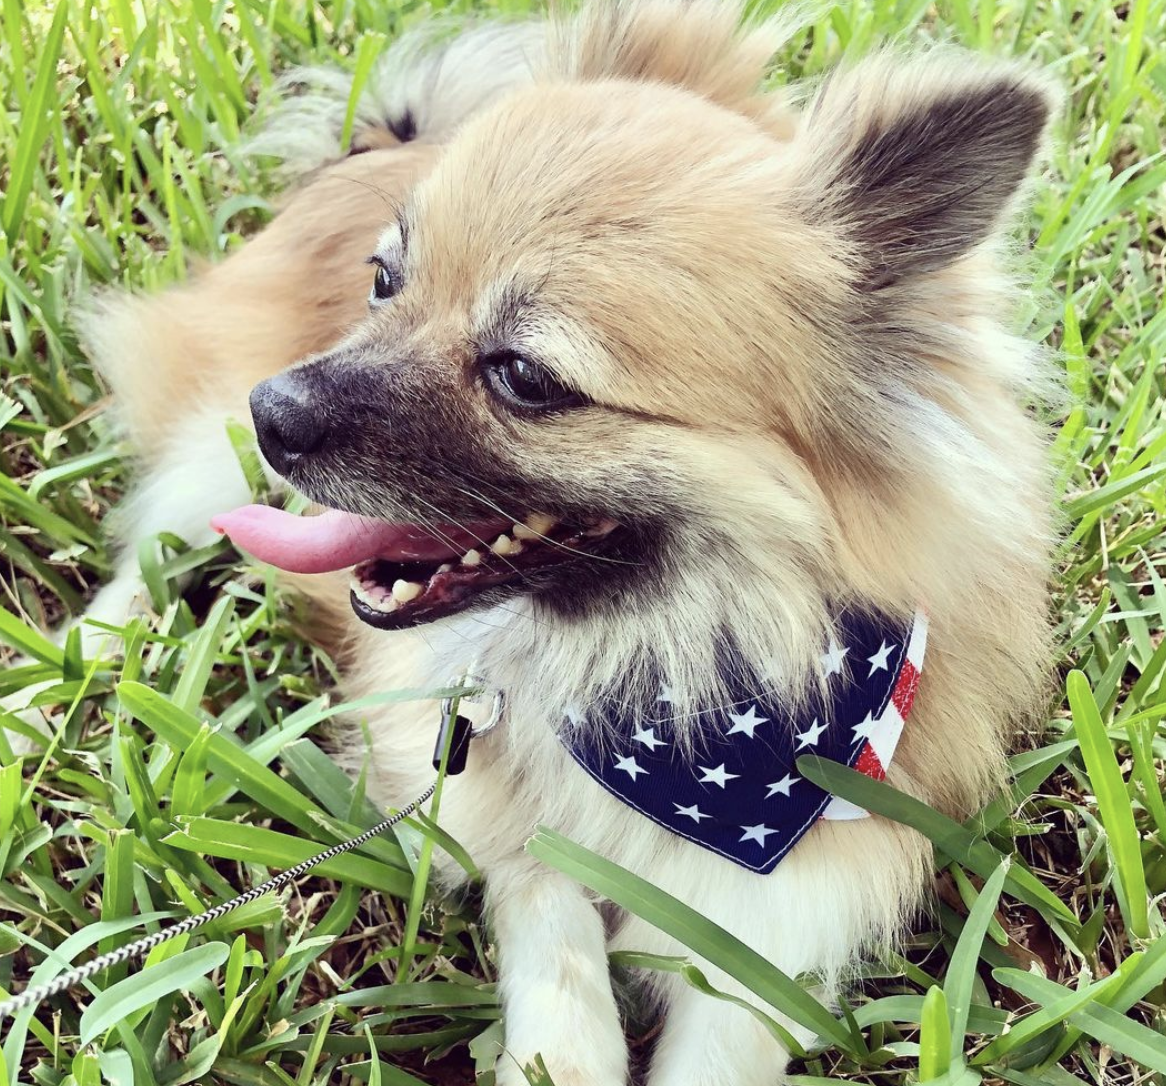 Photo Credit: @official_kiwi_thepom